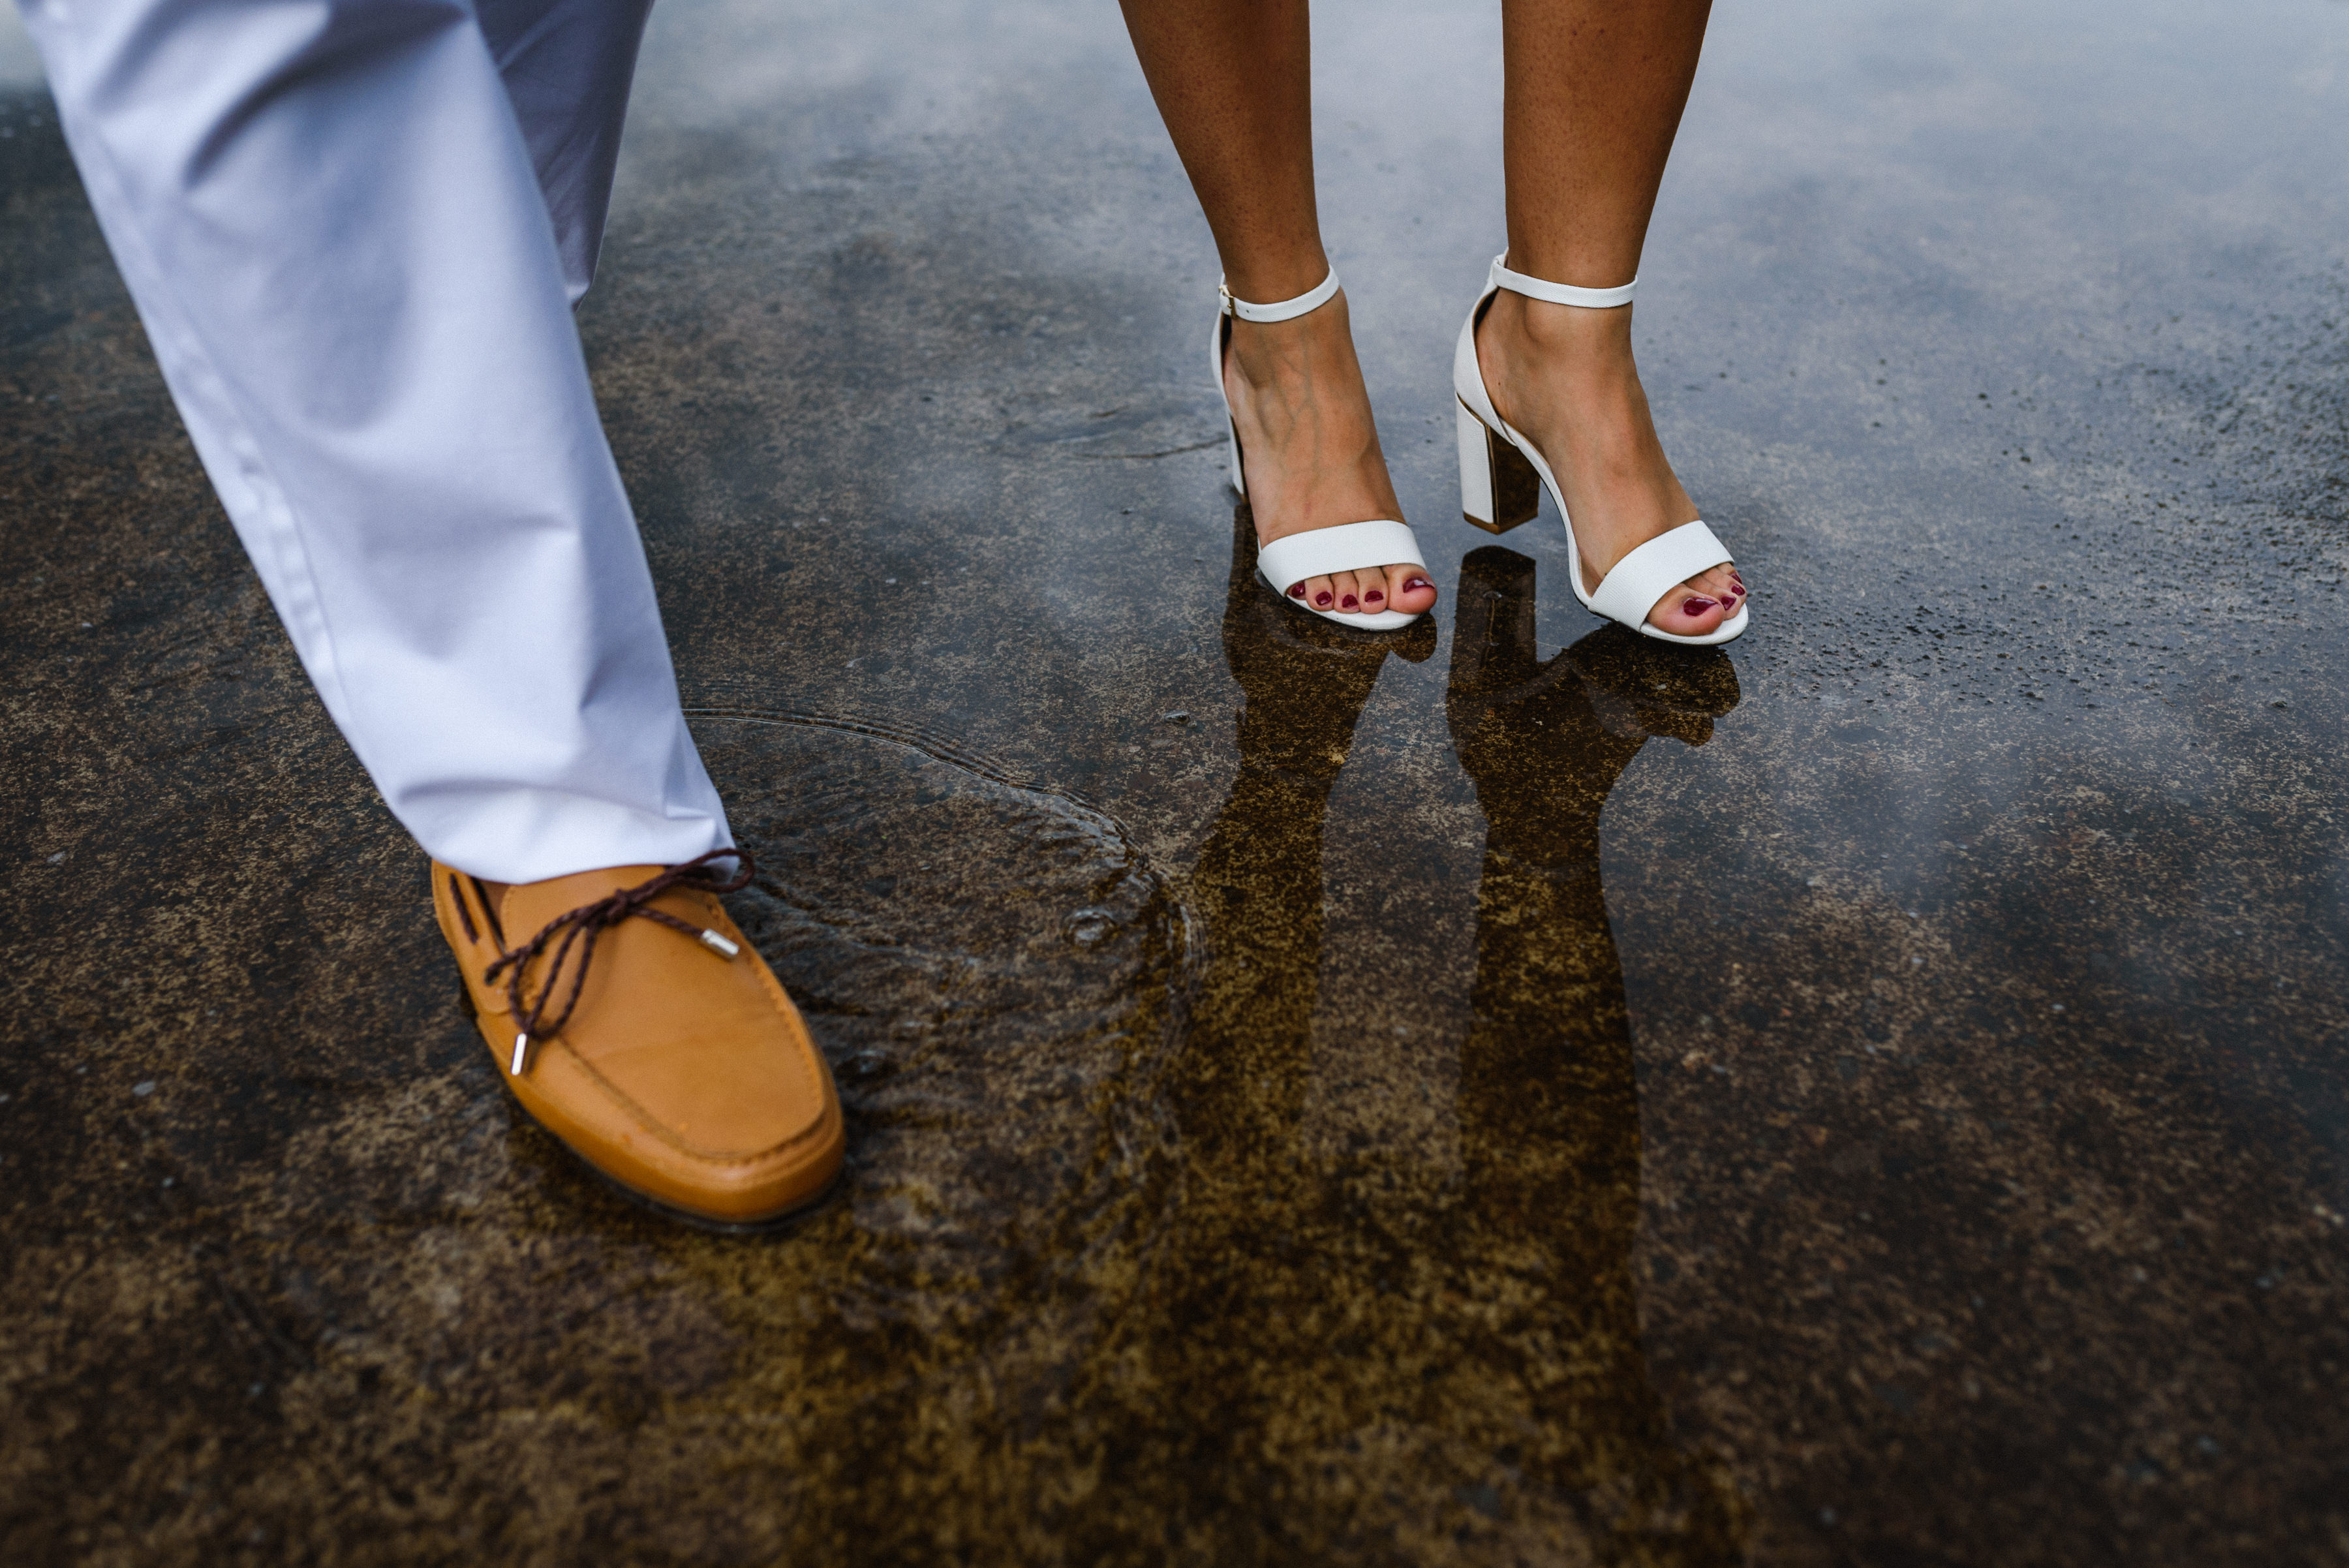 Close up of man and women's feet walking through puddle